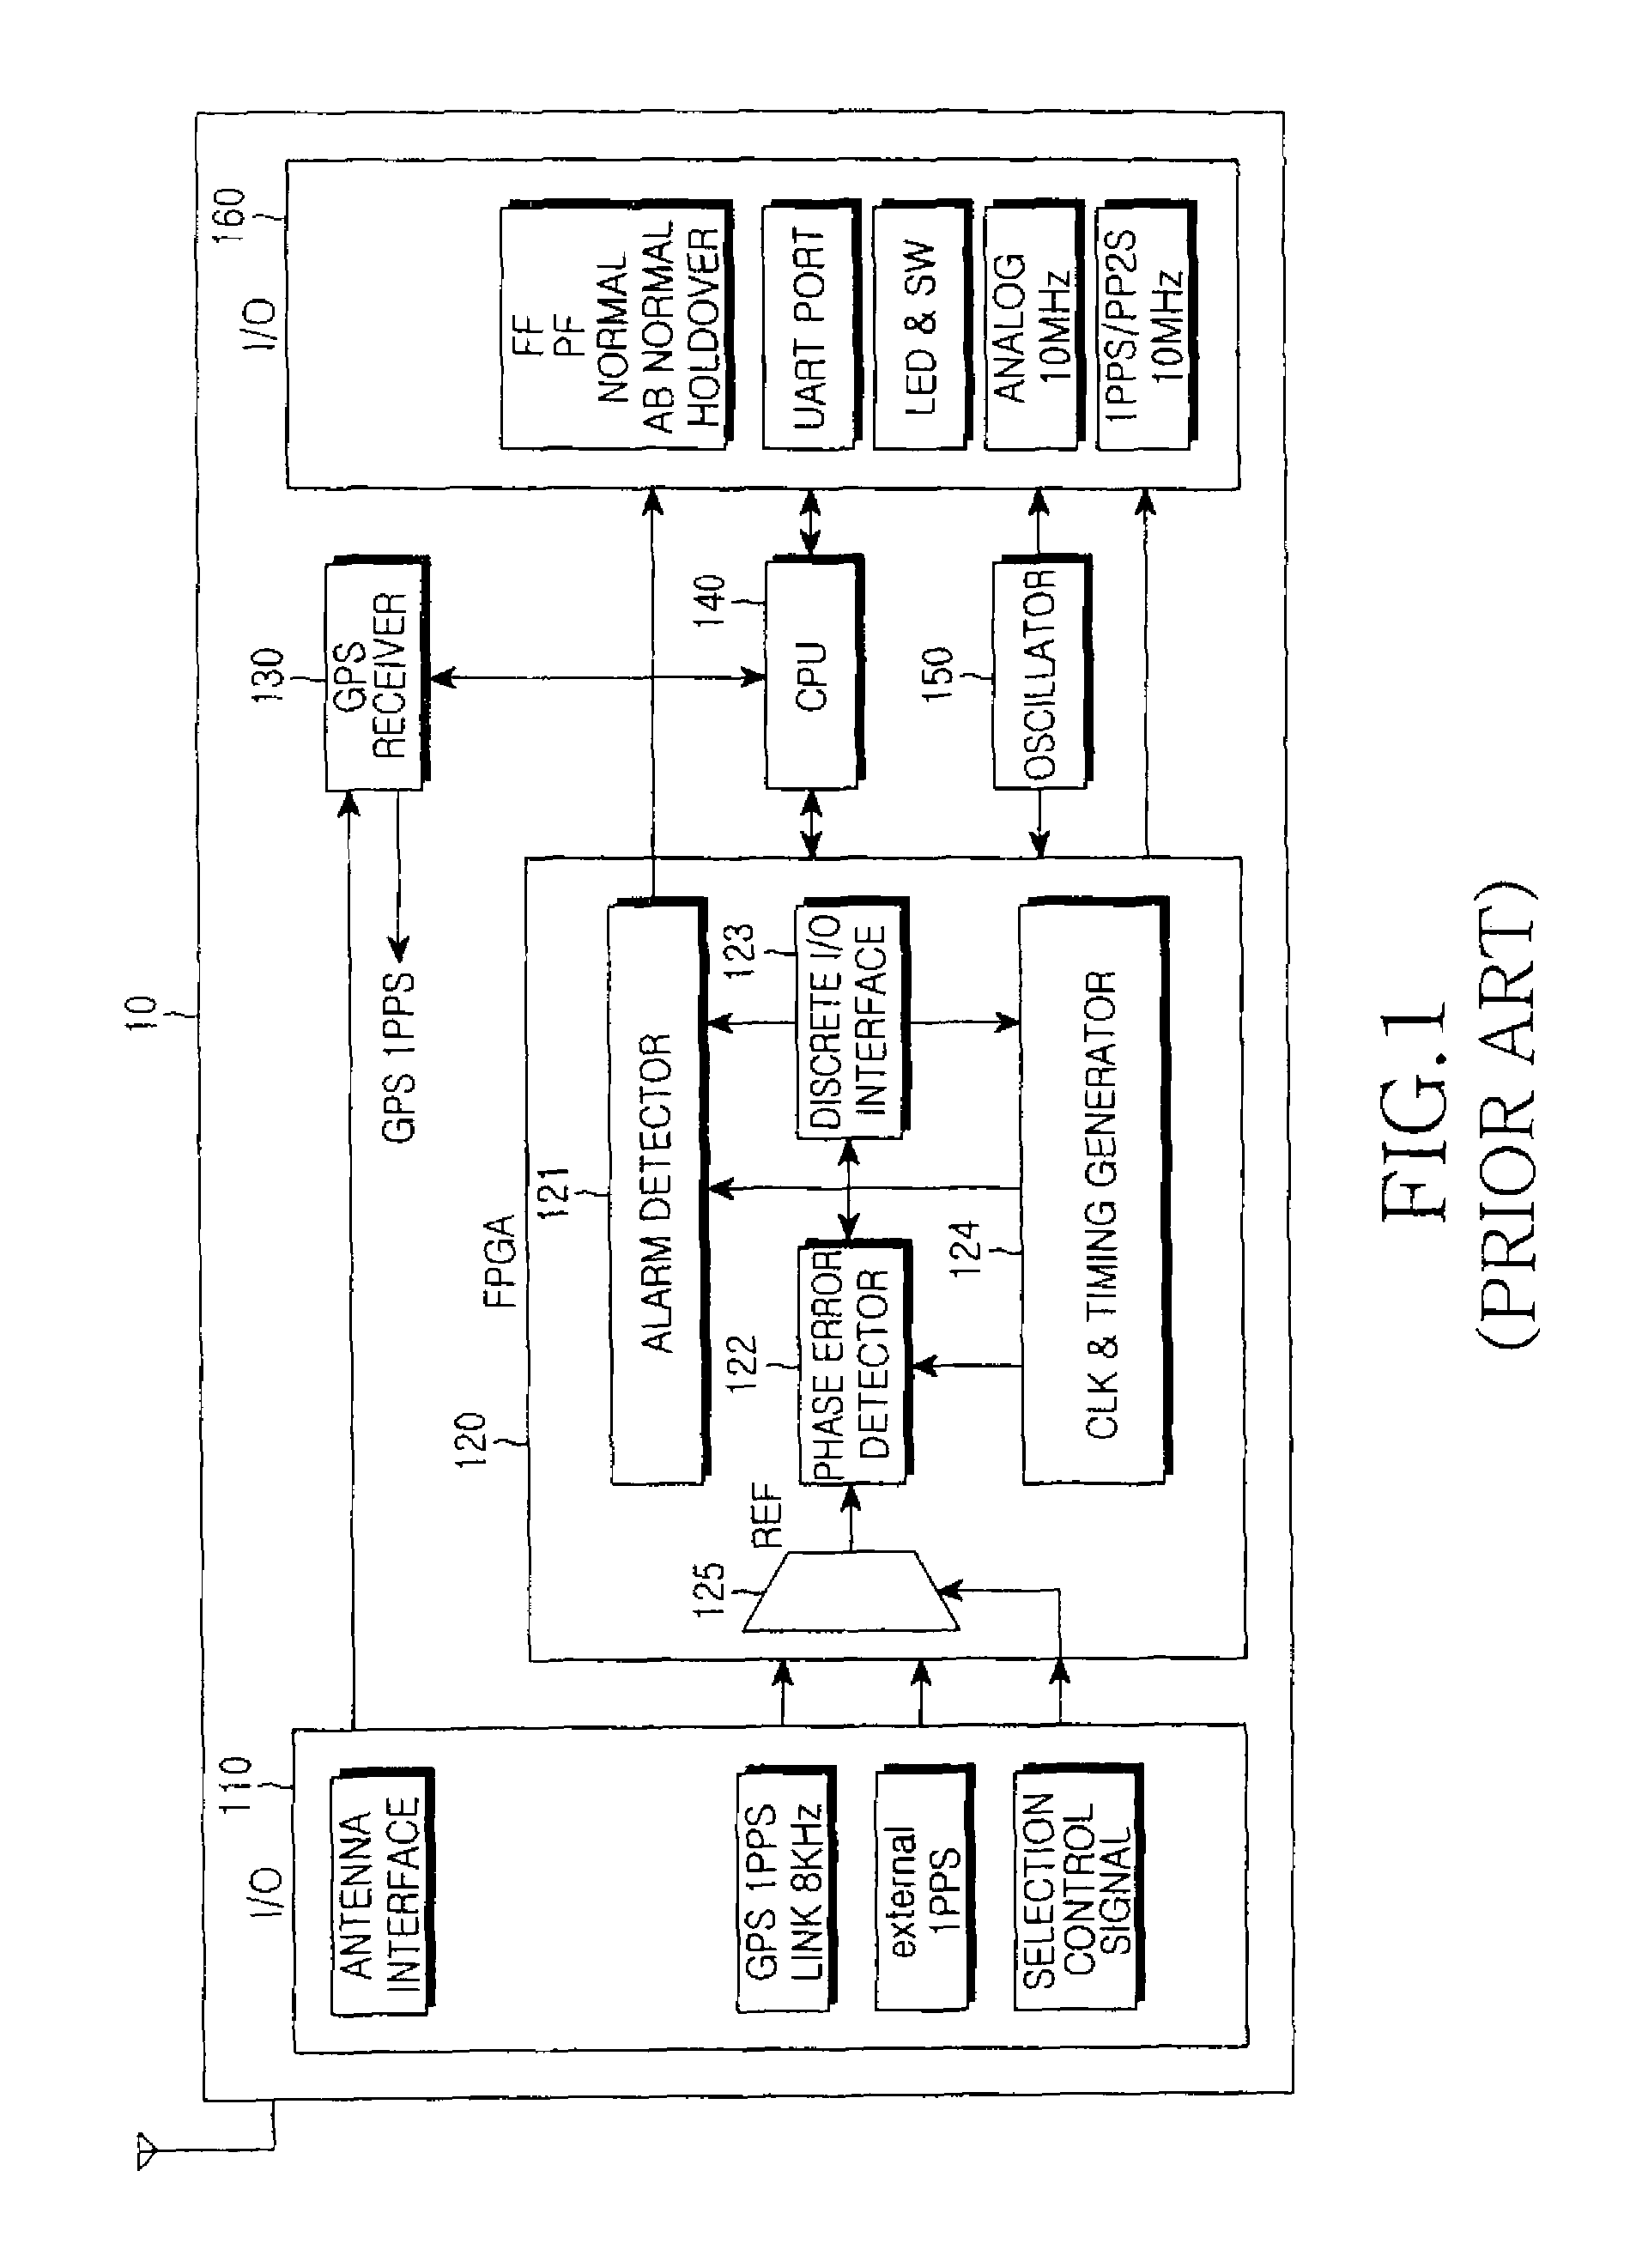 Method and apparatus for time synchronization using GPS information in communication system